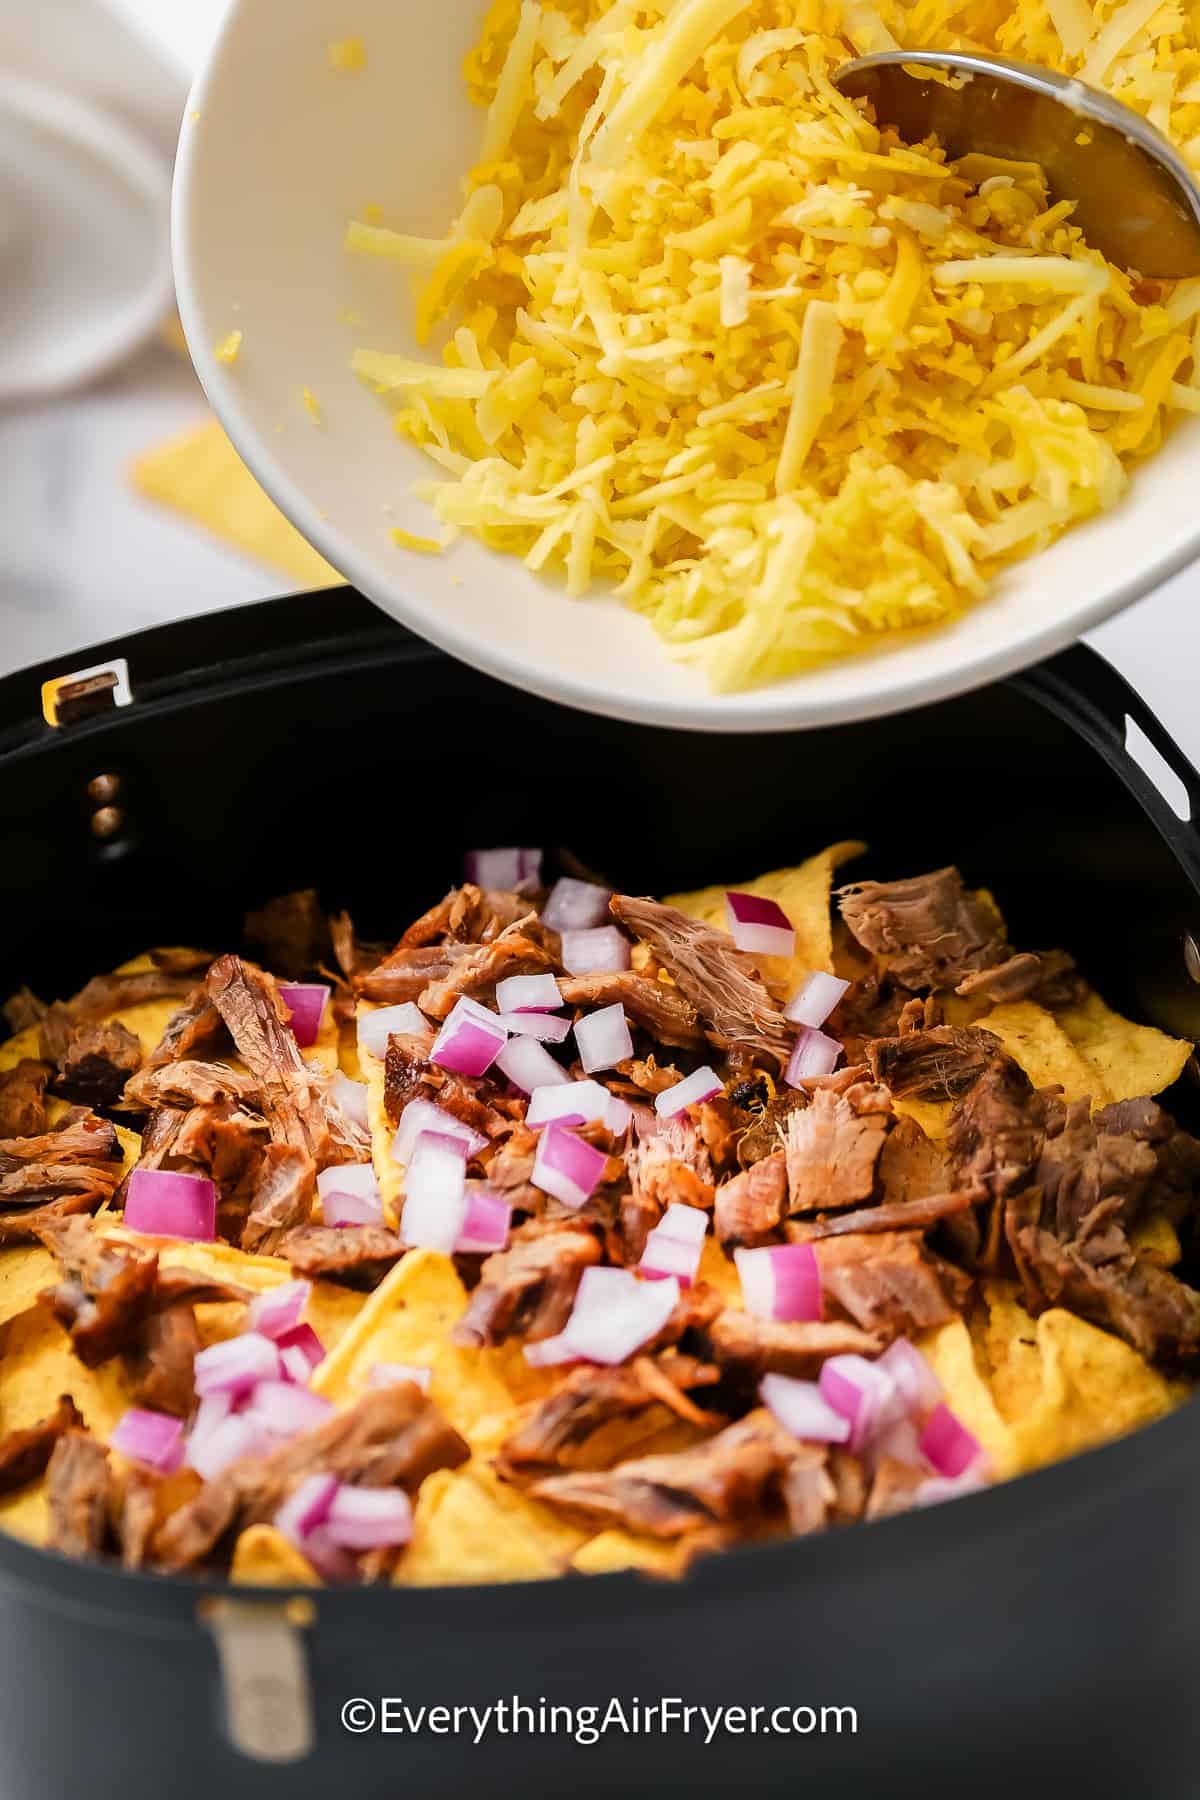 dumping grated cheese onto nacho chips in an air fryer tray